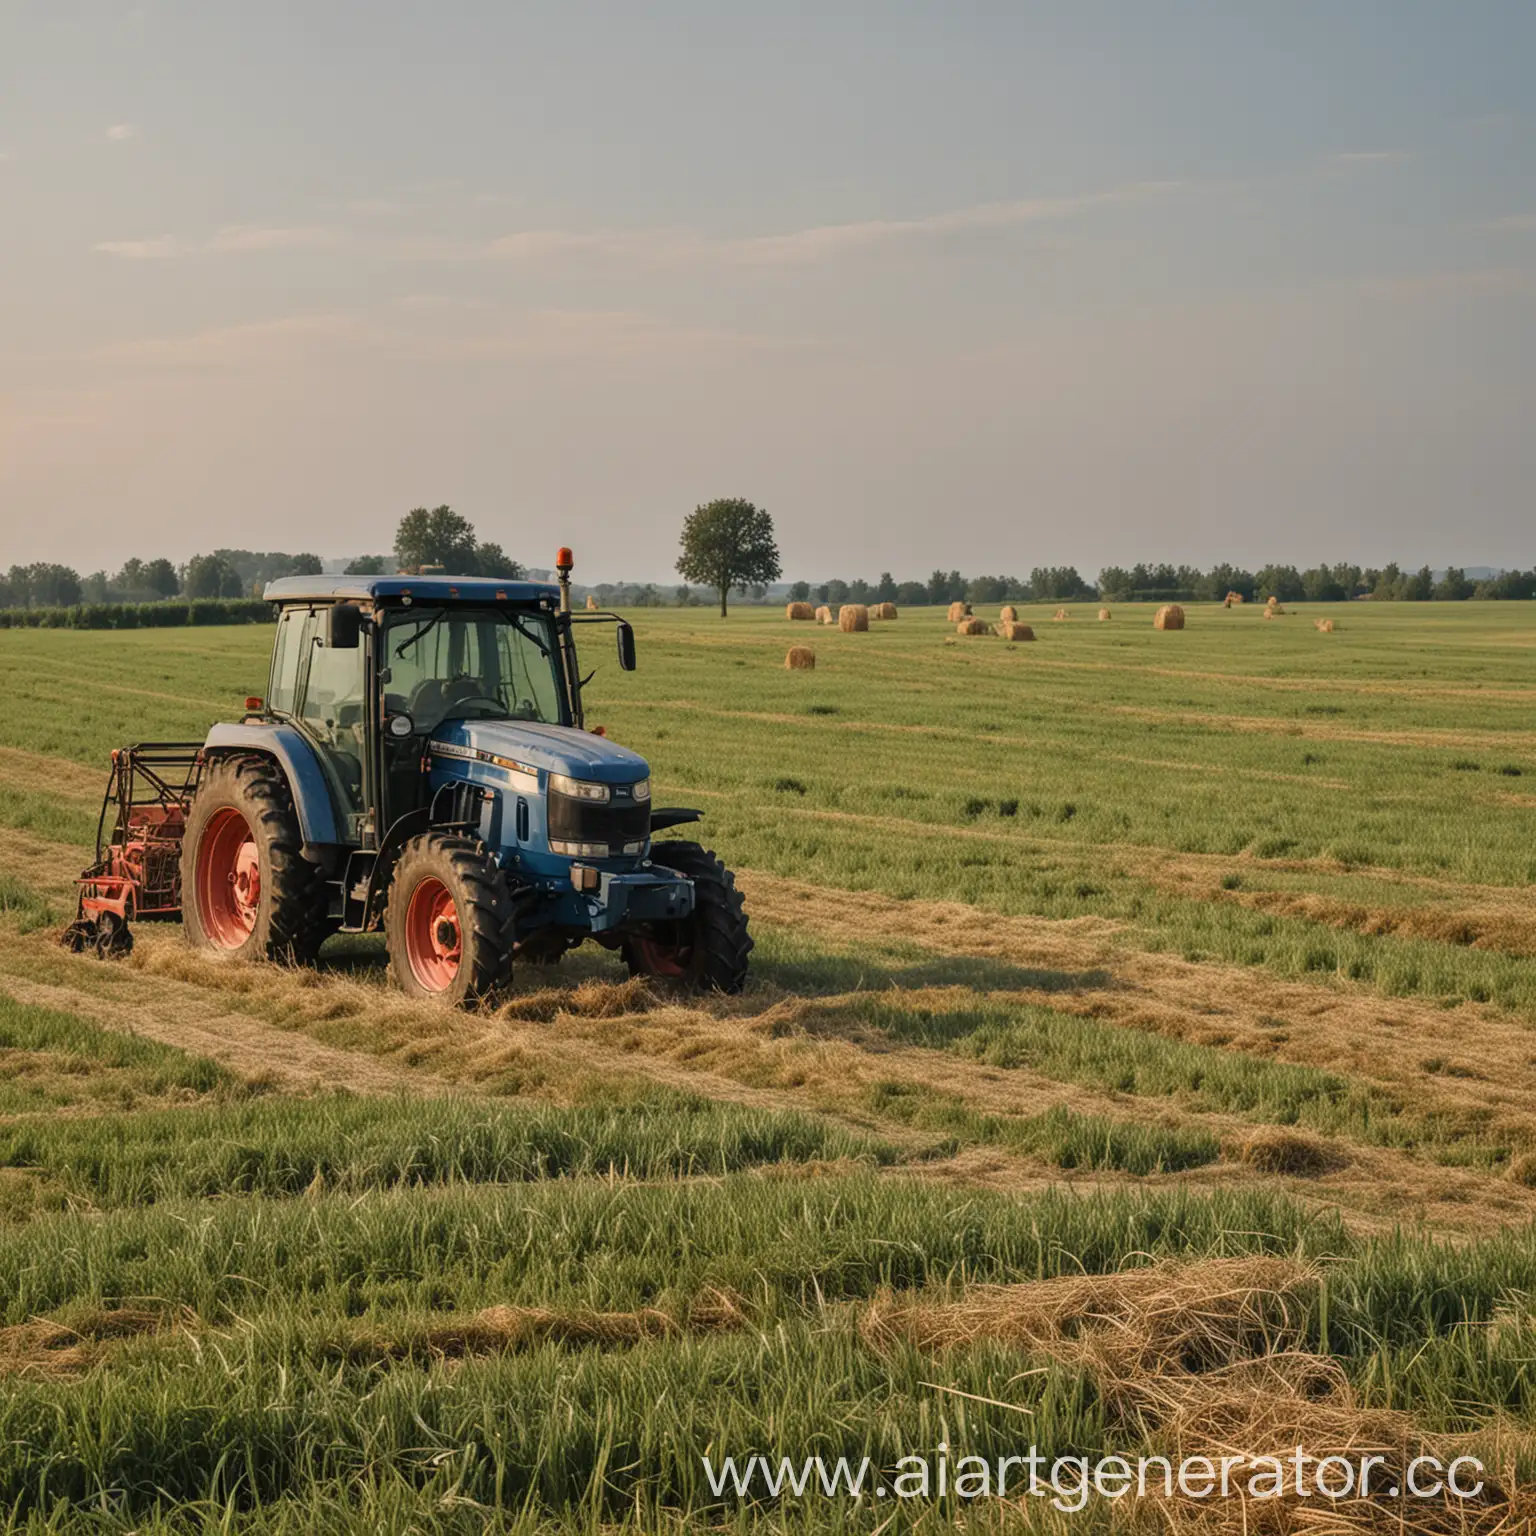 Rustic-Scene-Tractor-and-Hay-in-Field